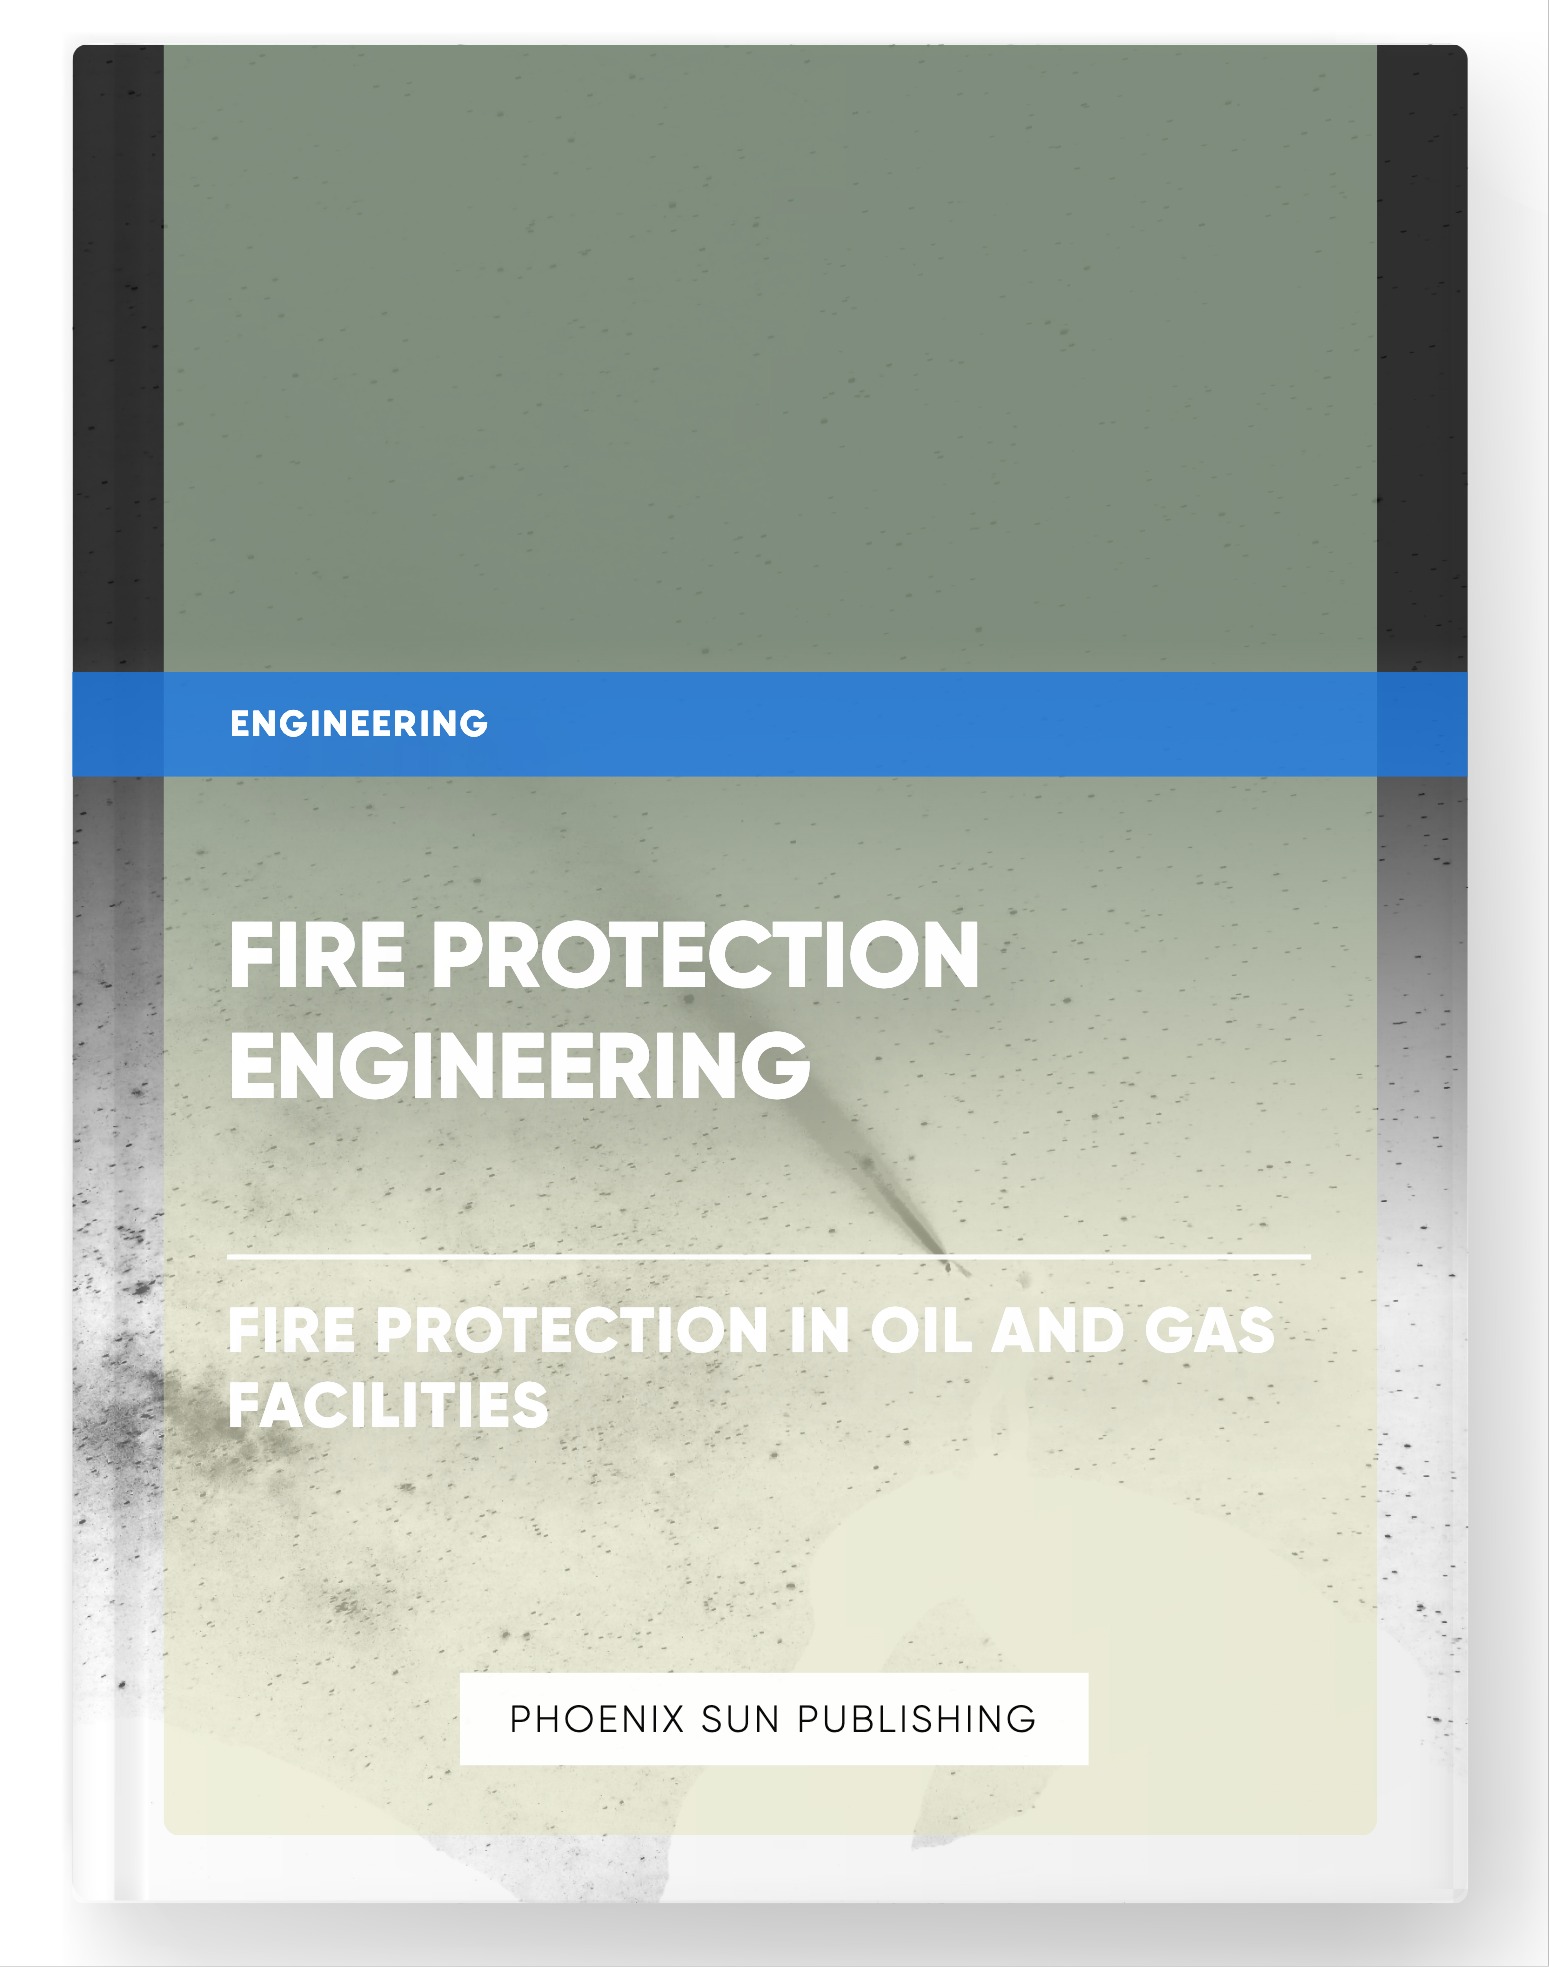 Fire Protection Engineering – Fire Protection in Oil and Gas Facilities